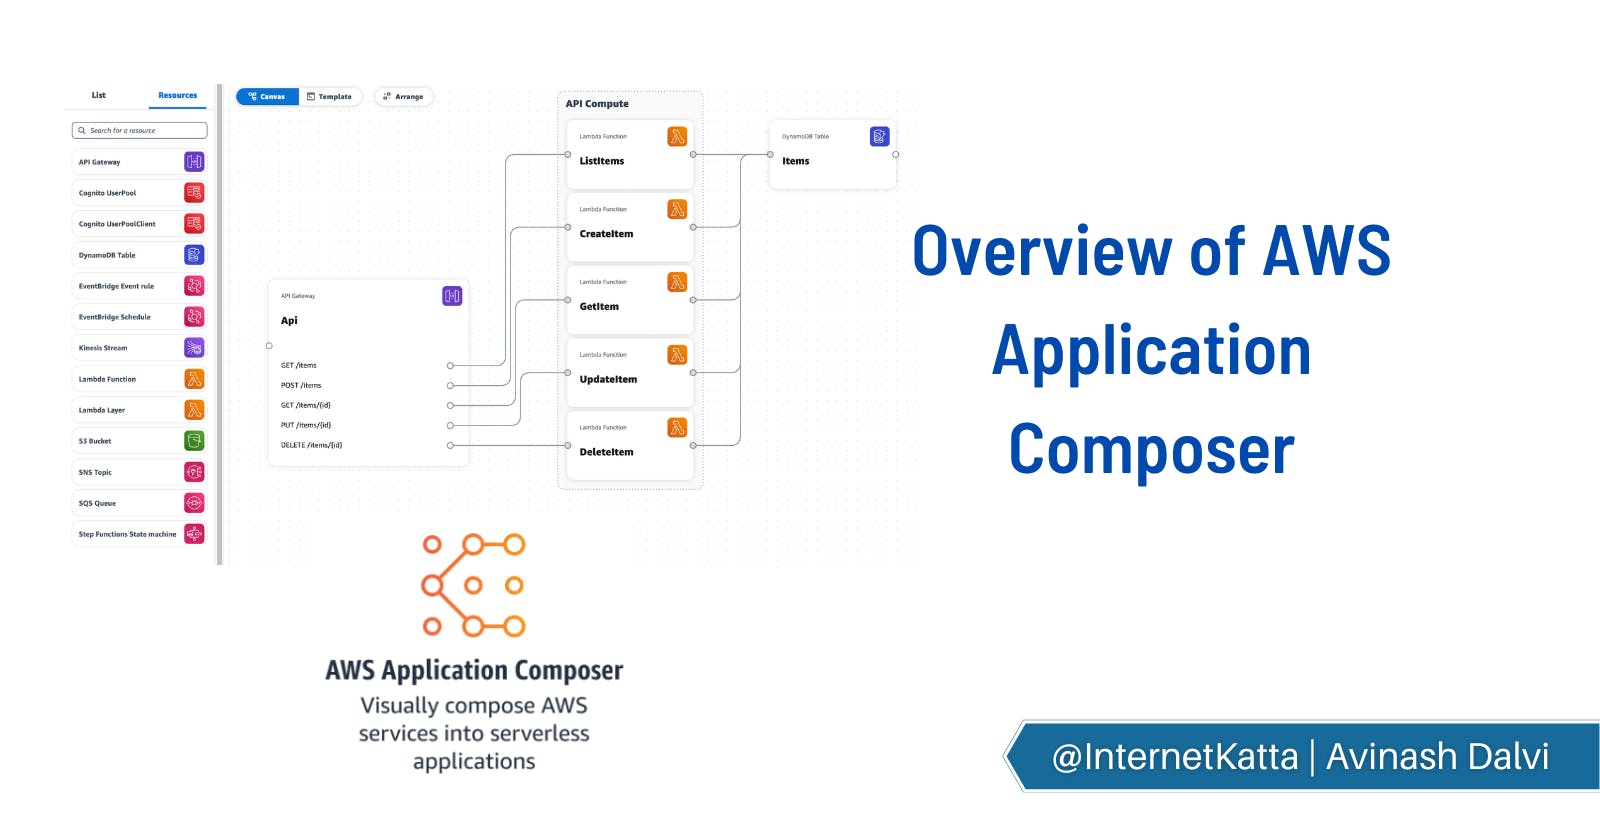 Overview of AWS Application Composer